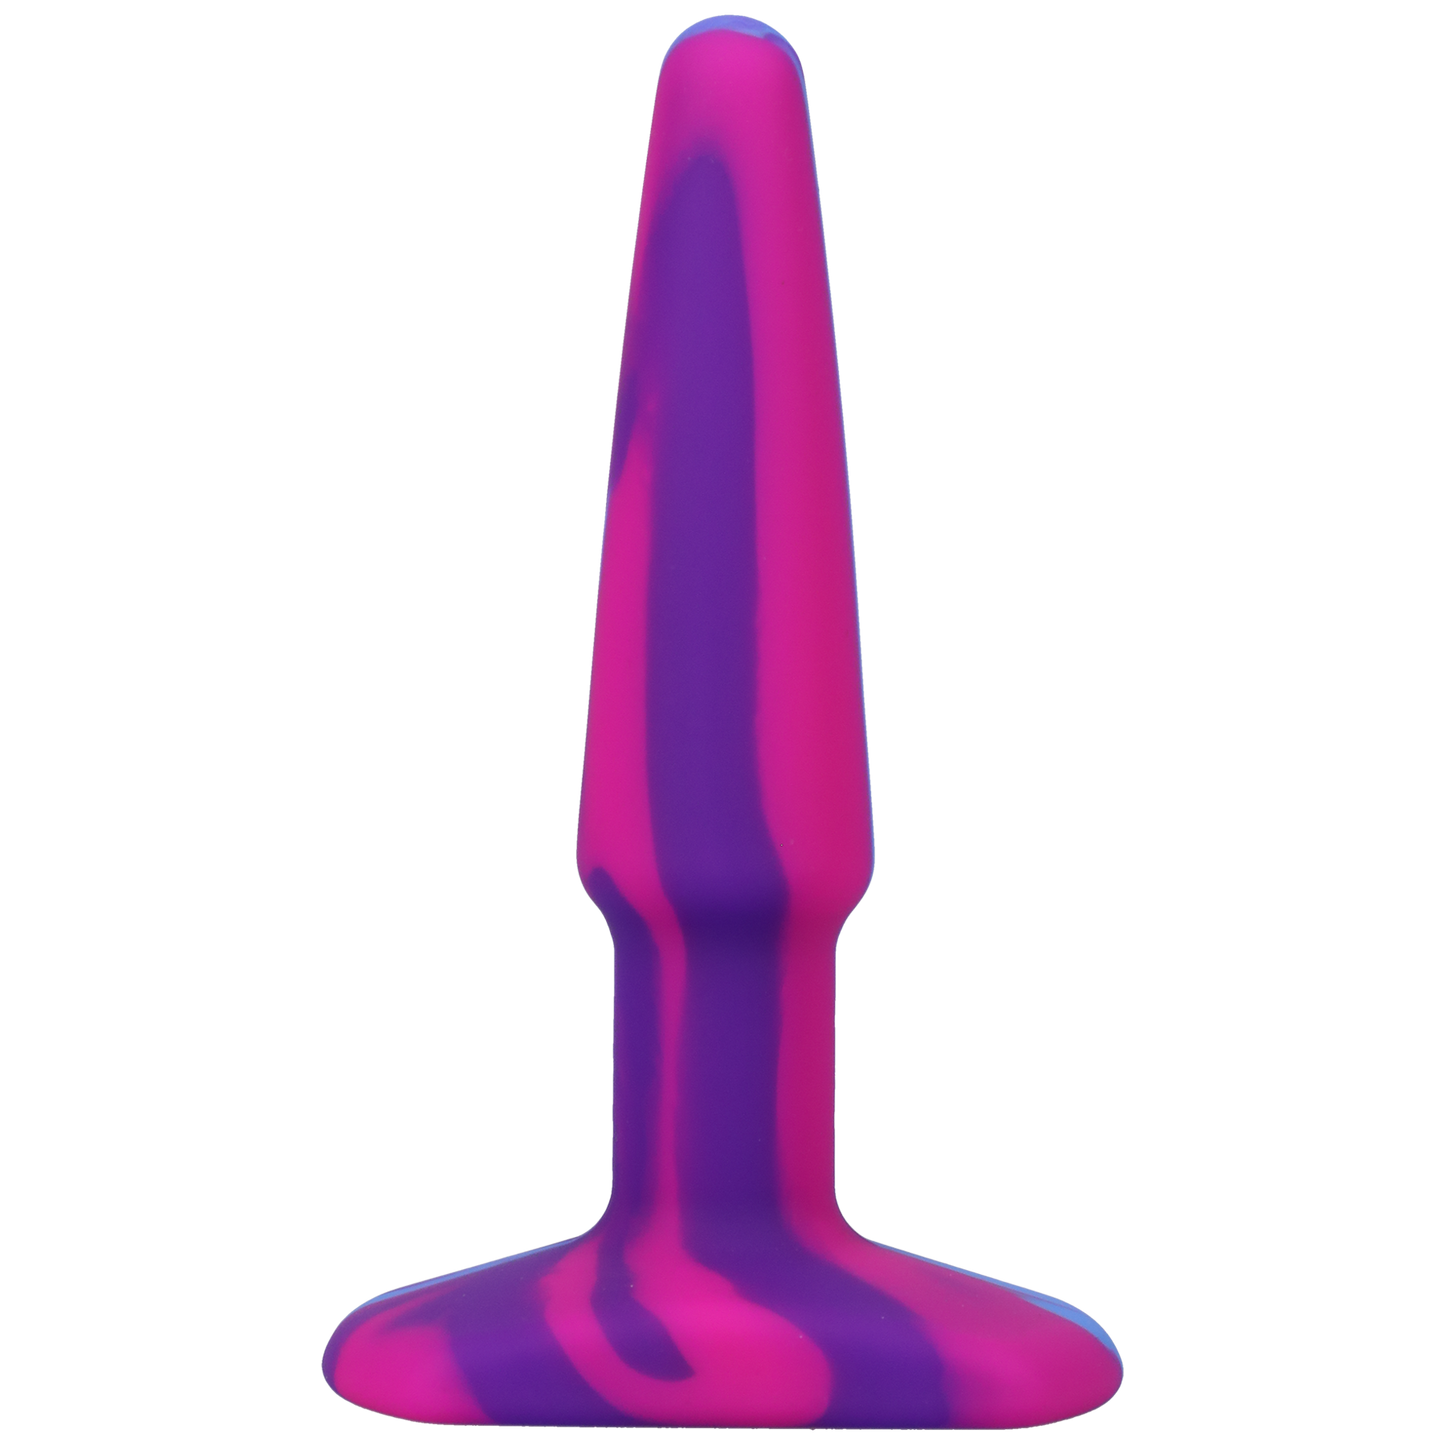 Silicone Anal Plug - 4 inch, Berry - Thorn & Feather Sex Toy Canada